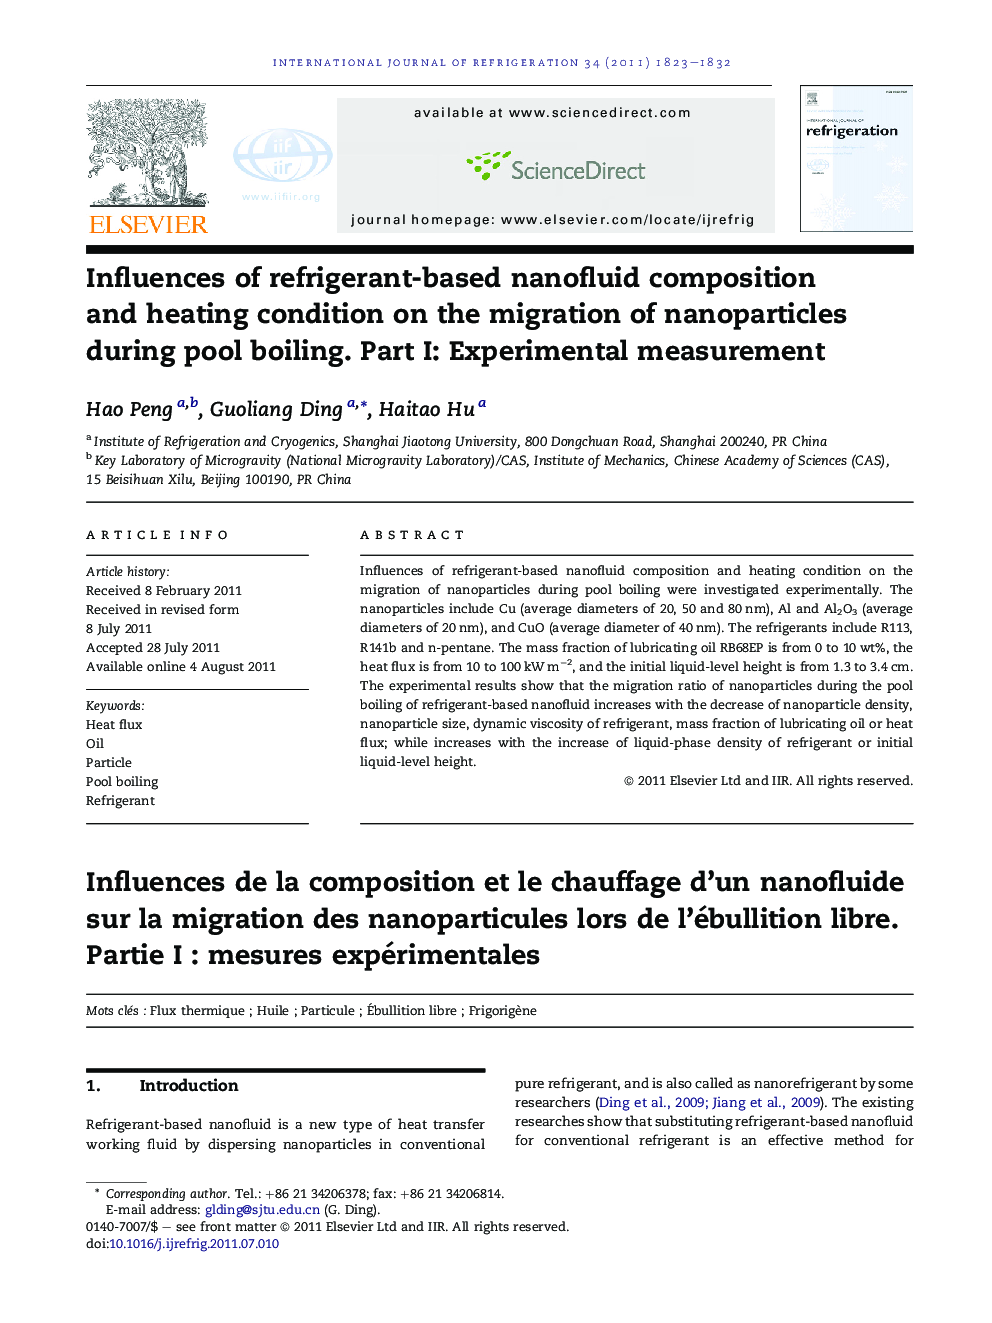 Influences of refrigerant-based nanofluid composition and heating condition on the migration of nanoparticles during pool boiling. Part I: Experimental measurement